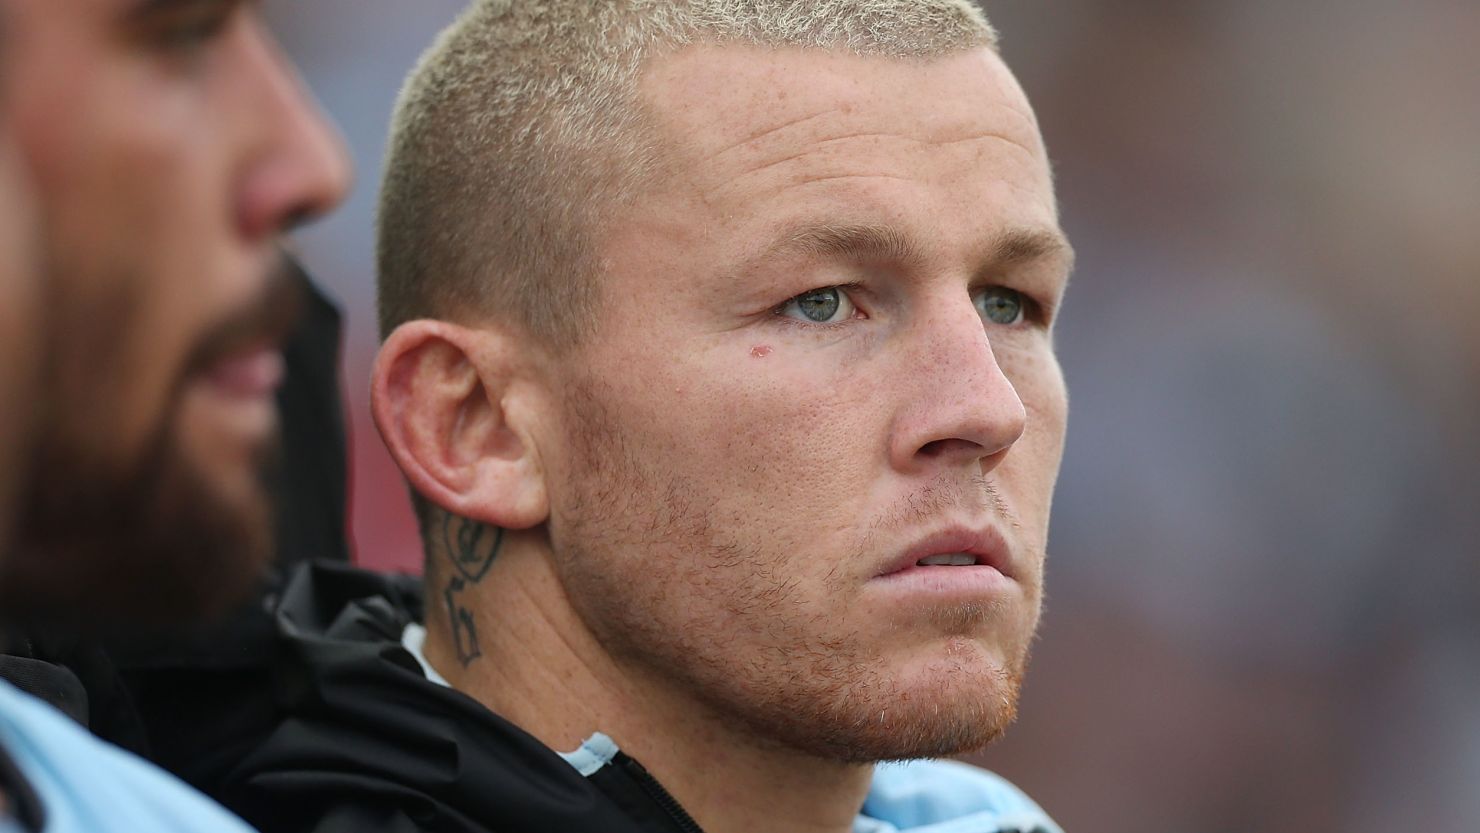 Australian rugby league star Todd Carney has been sacked from his club over his latest indiscretion.